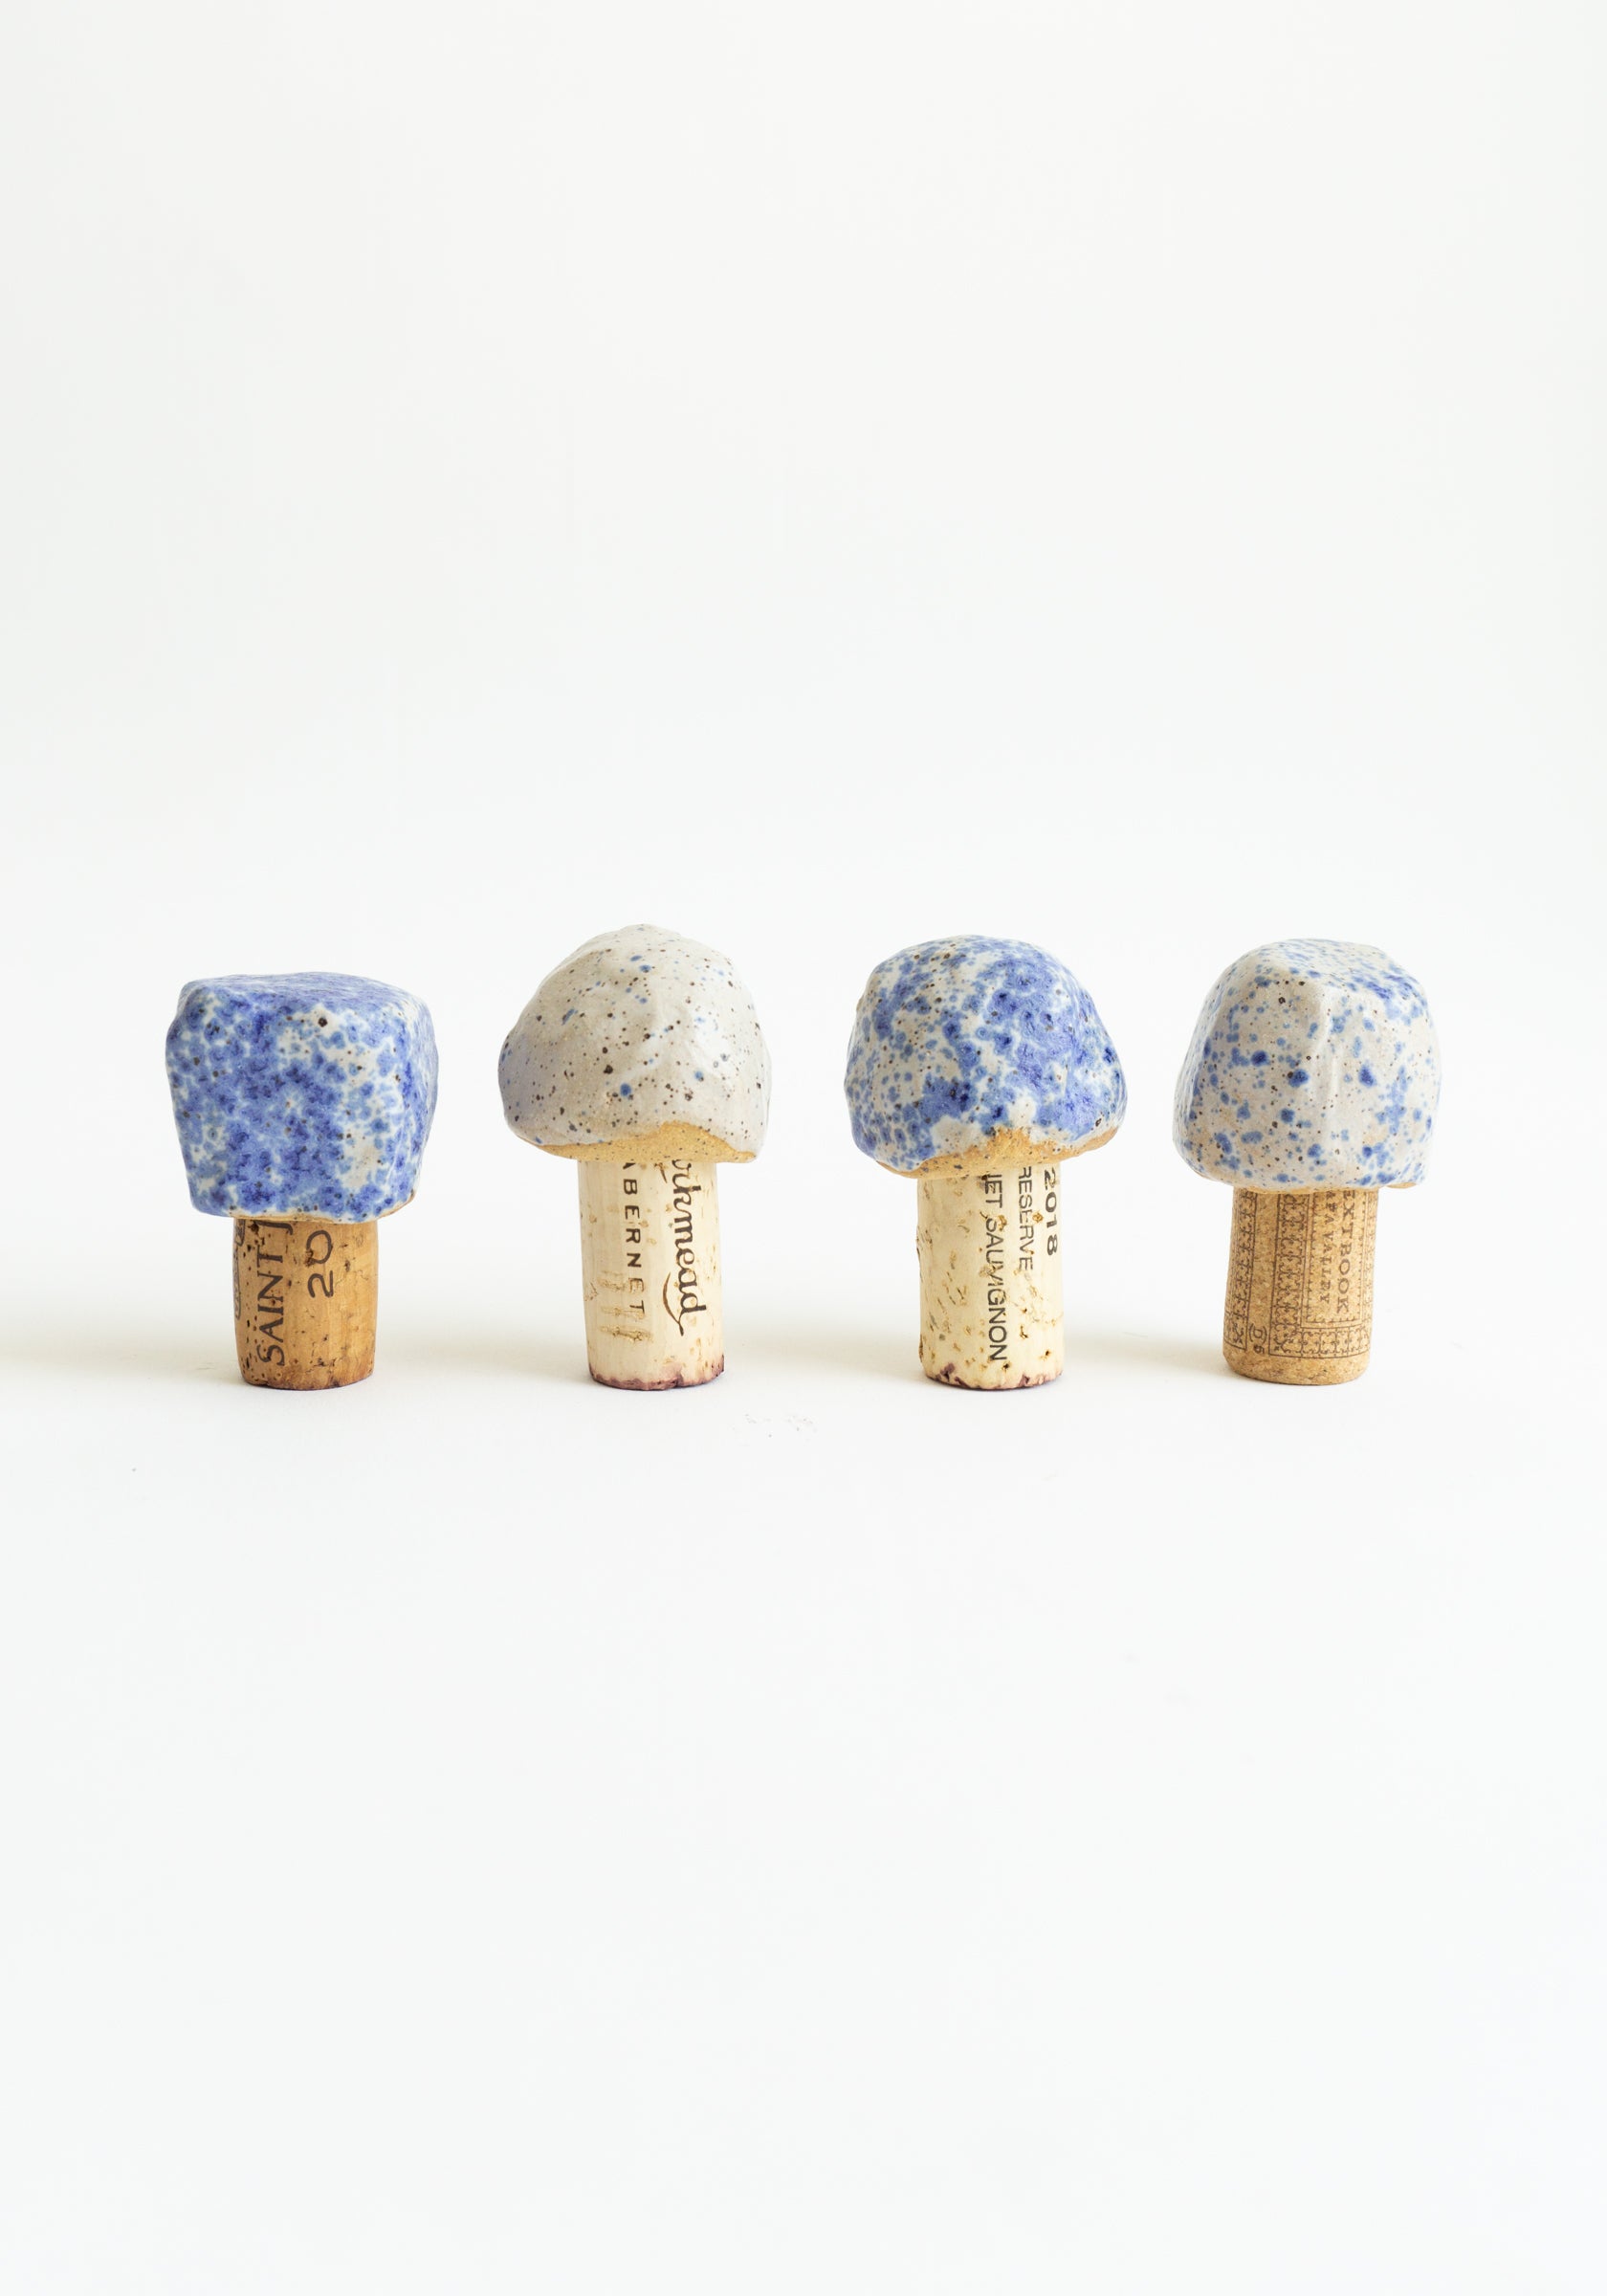 Annie Raysse Wine Stopper in Speckle